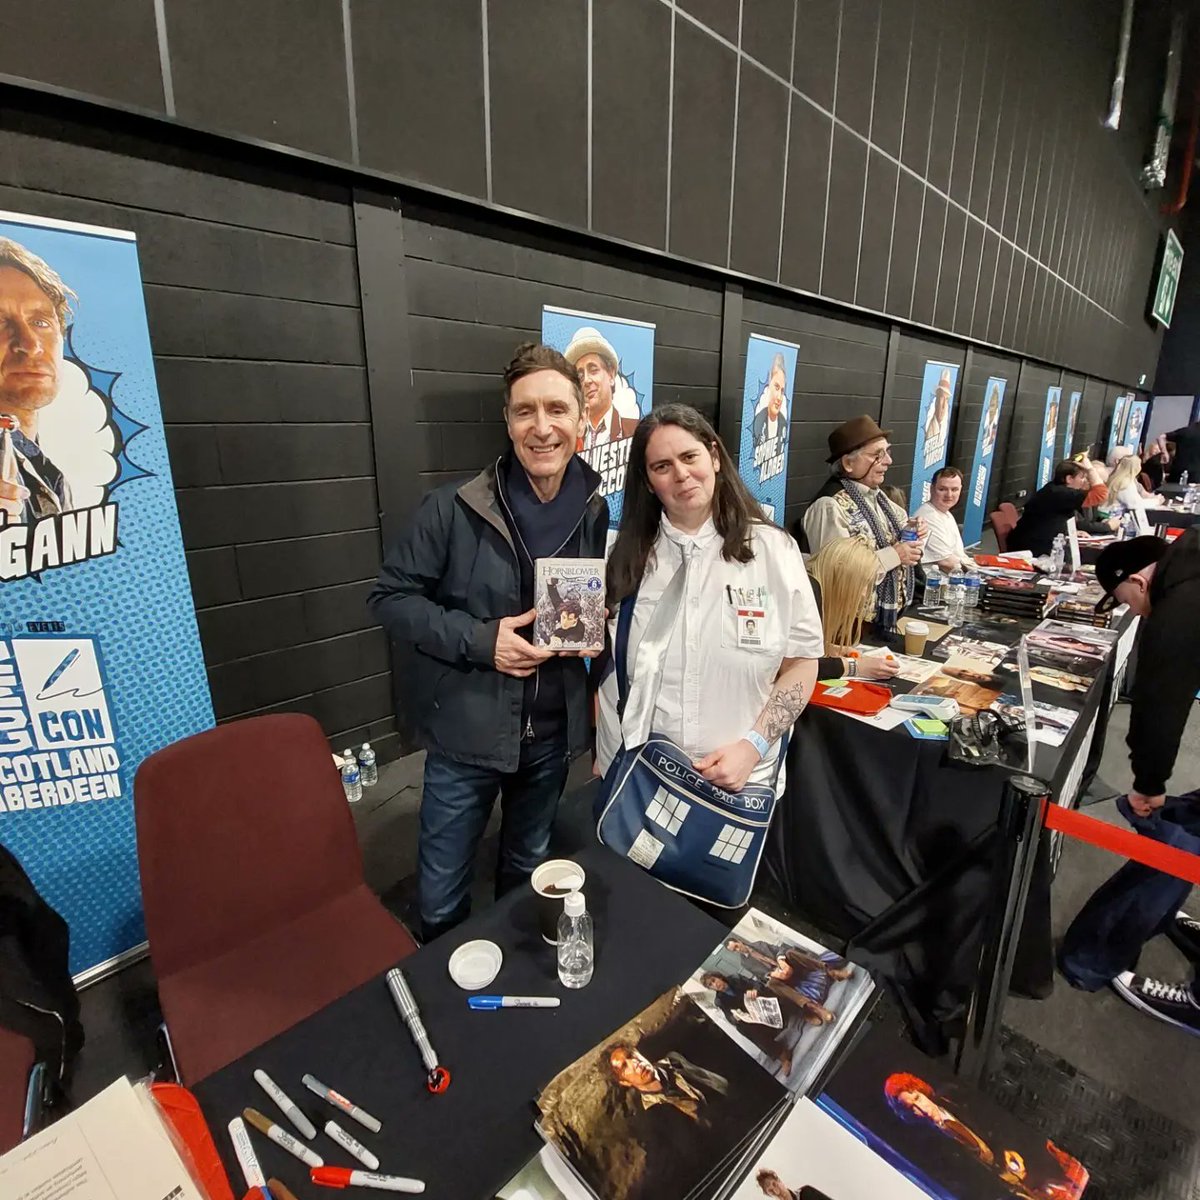 A month ago, I met Paul McGann at #comicconaberdeen I was so nervous about meeting him and he was so nice. He took the time to talk me about Hornblower which I wasn't expecting him to do.